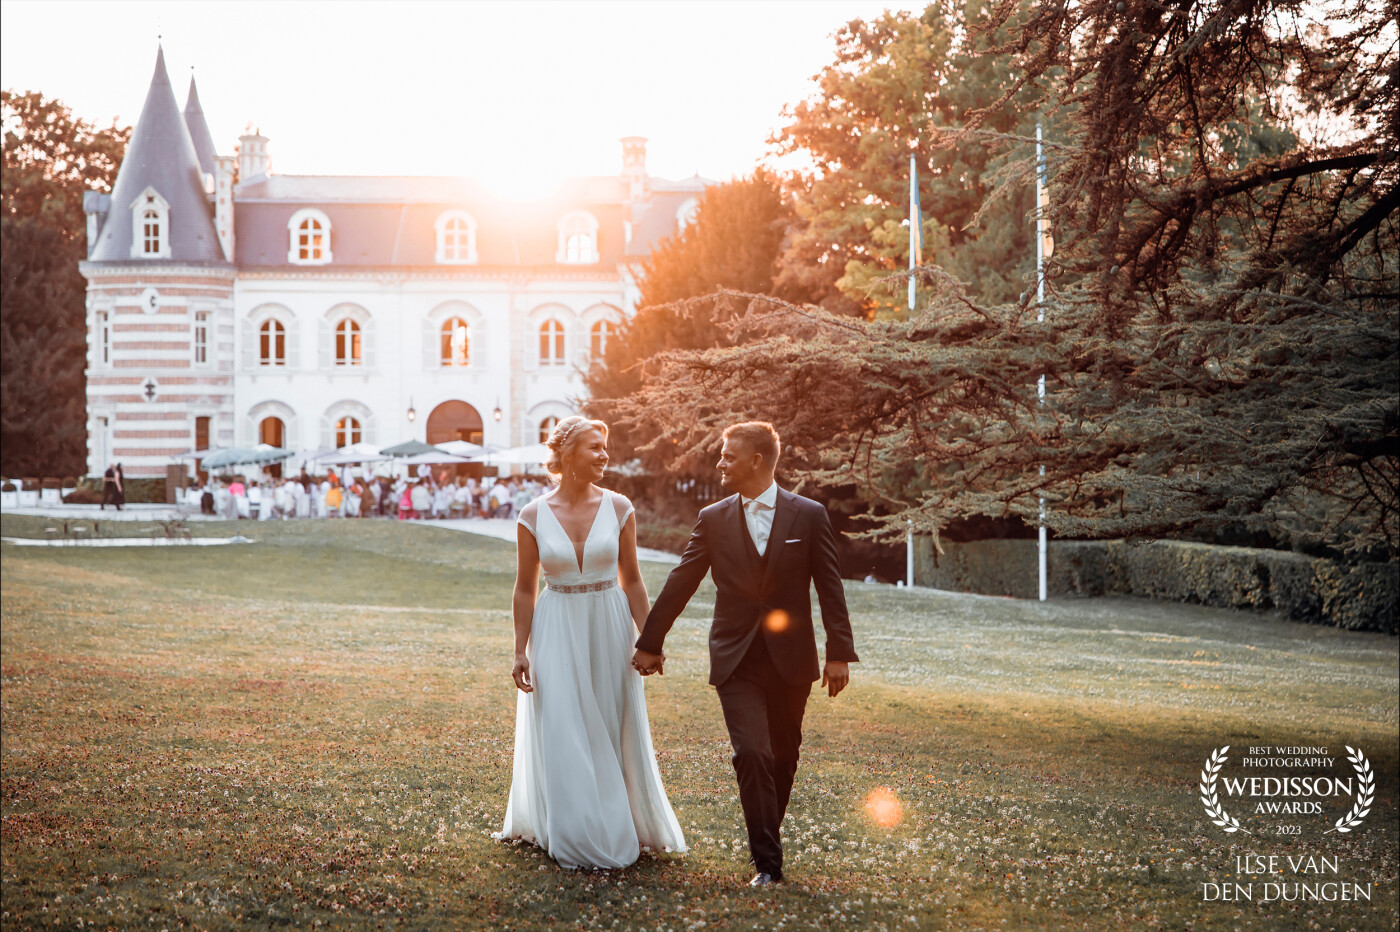 After a wonderful wedding day we were chasing the sunlight that would disappear behind the champagne house in Epernay. I just love the lens flare, the beautiful couple and the guests in the background who where enjoying themselves during this shoot.